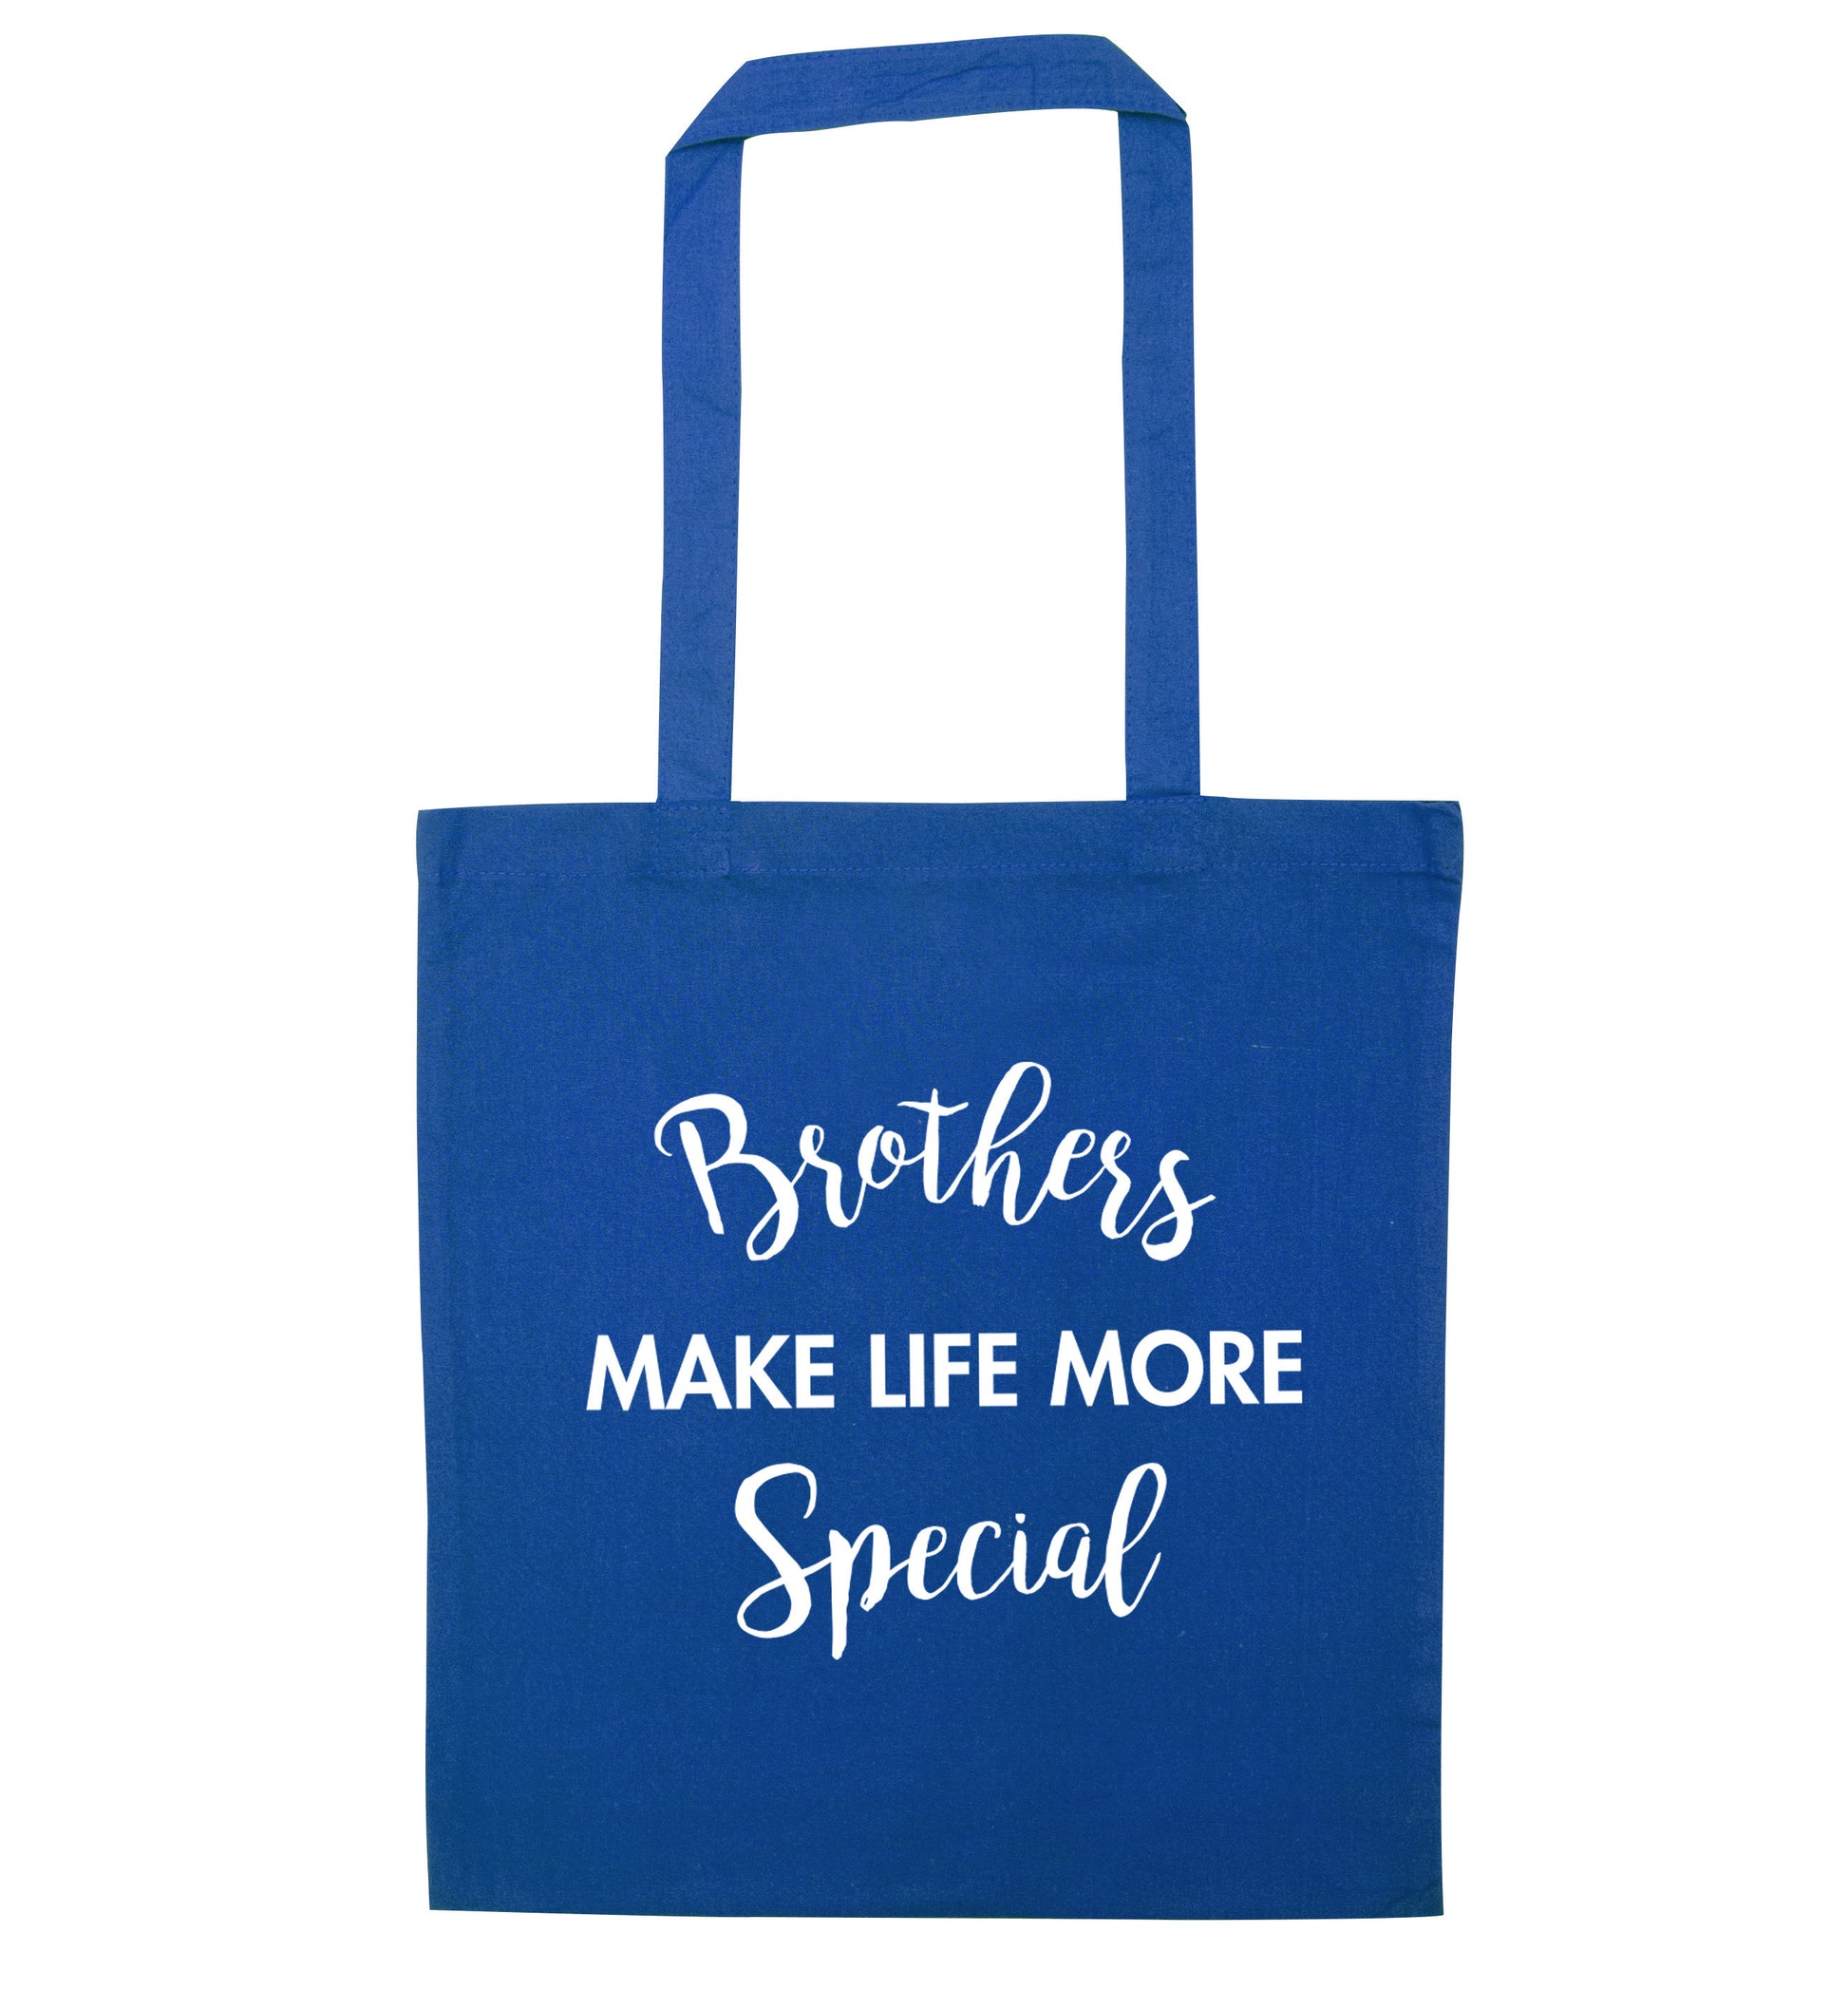 Brothers make life more special blue tote bag